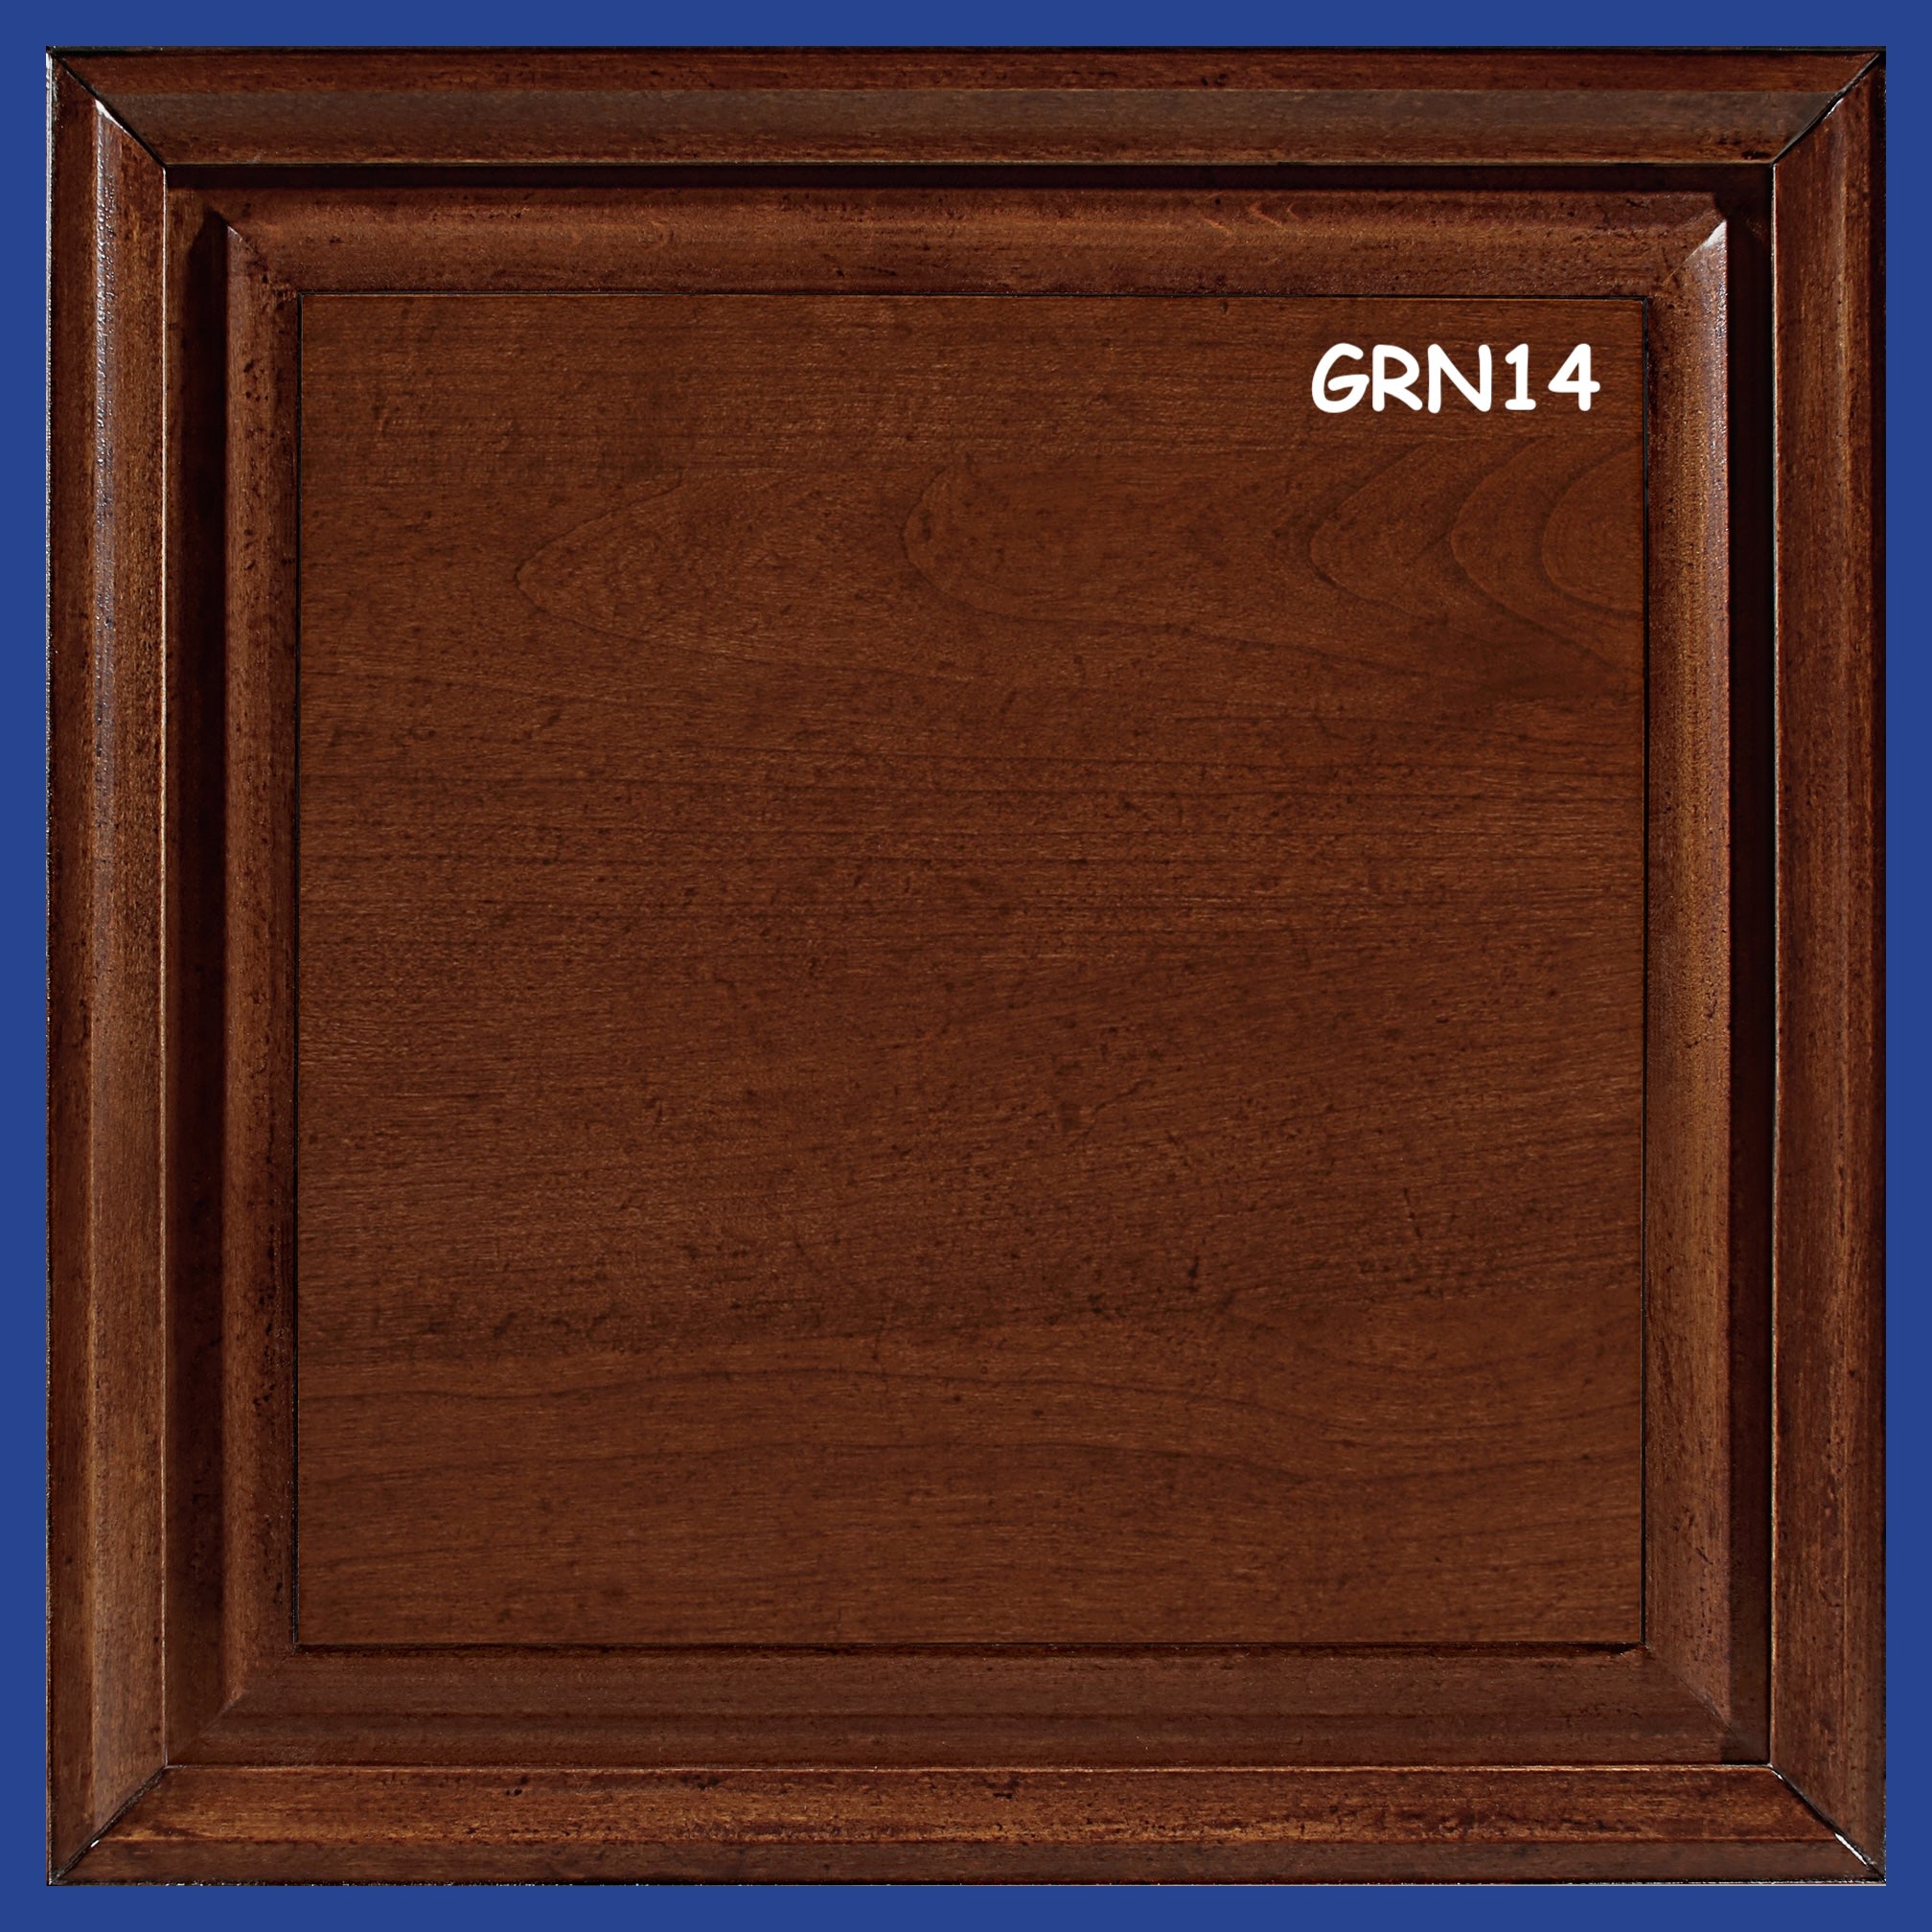 Complete Classic Double Bedroom in Cherry Wood Piombini Art Collection Mirror as a Gift 